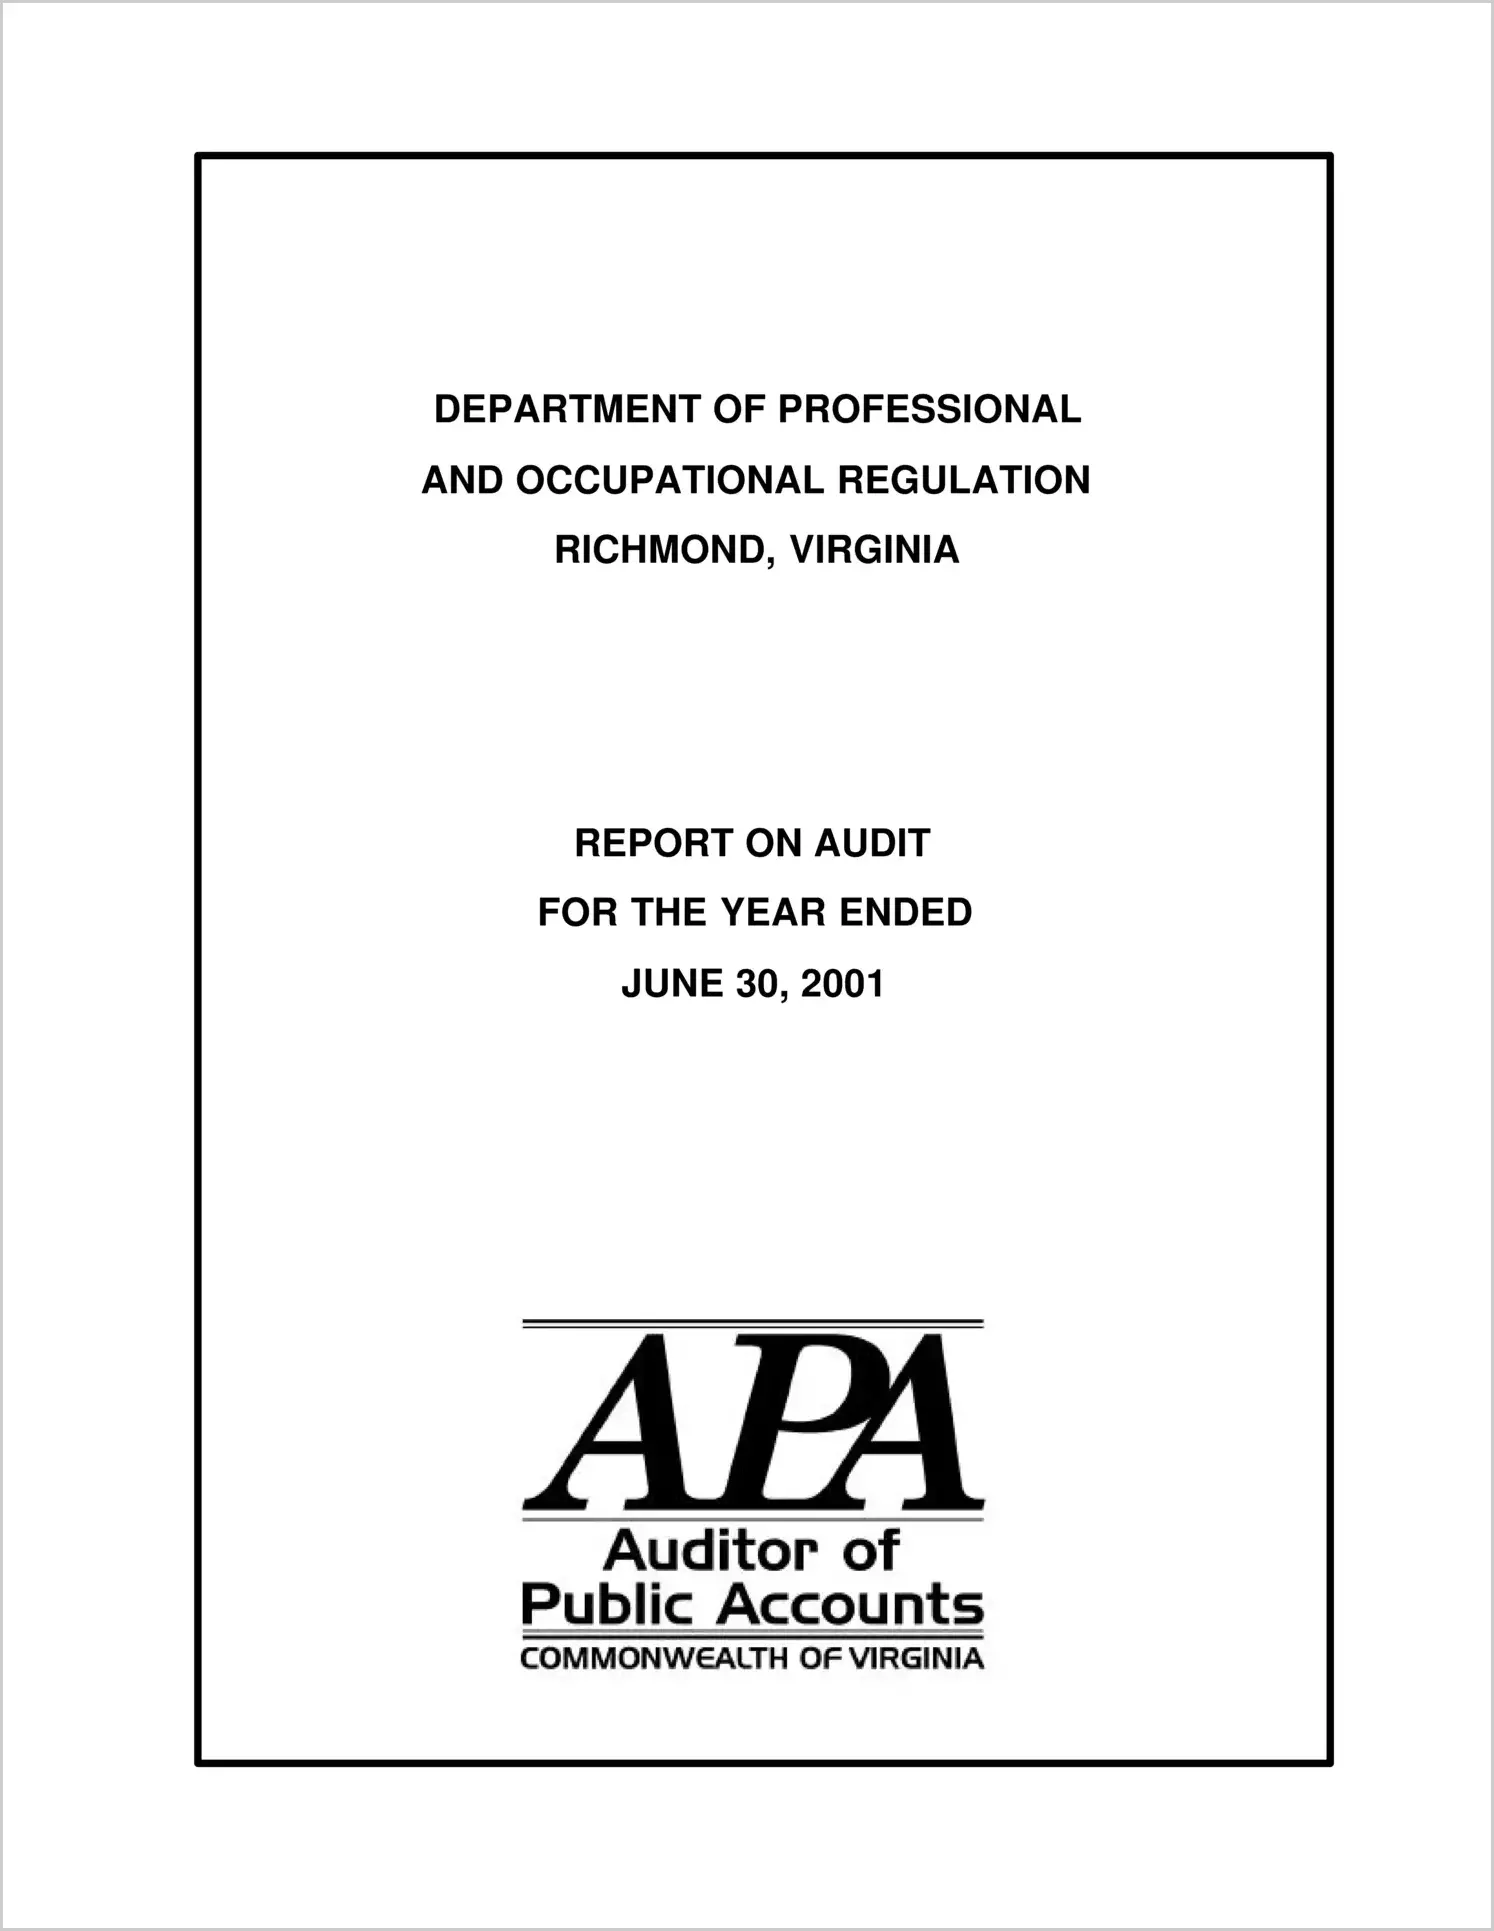 Department of Professional and Occupational Regulation for the year ended June 30, 2001